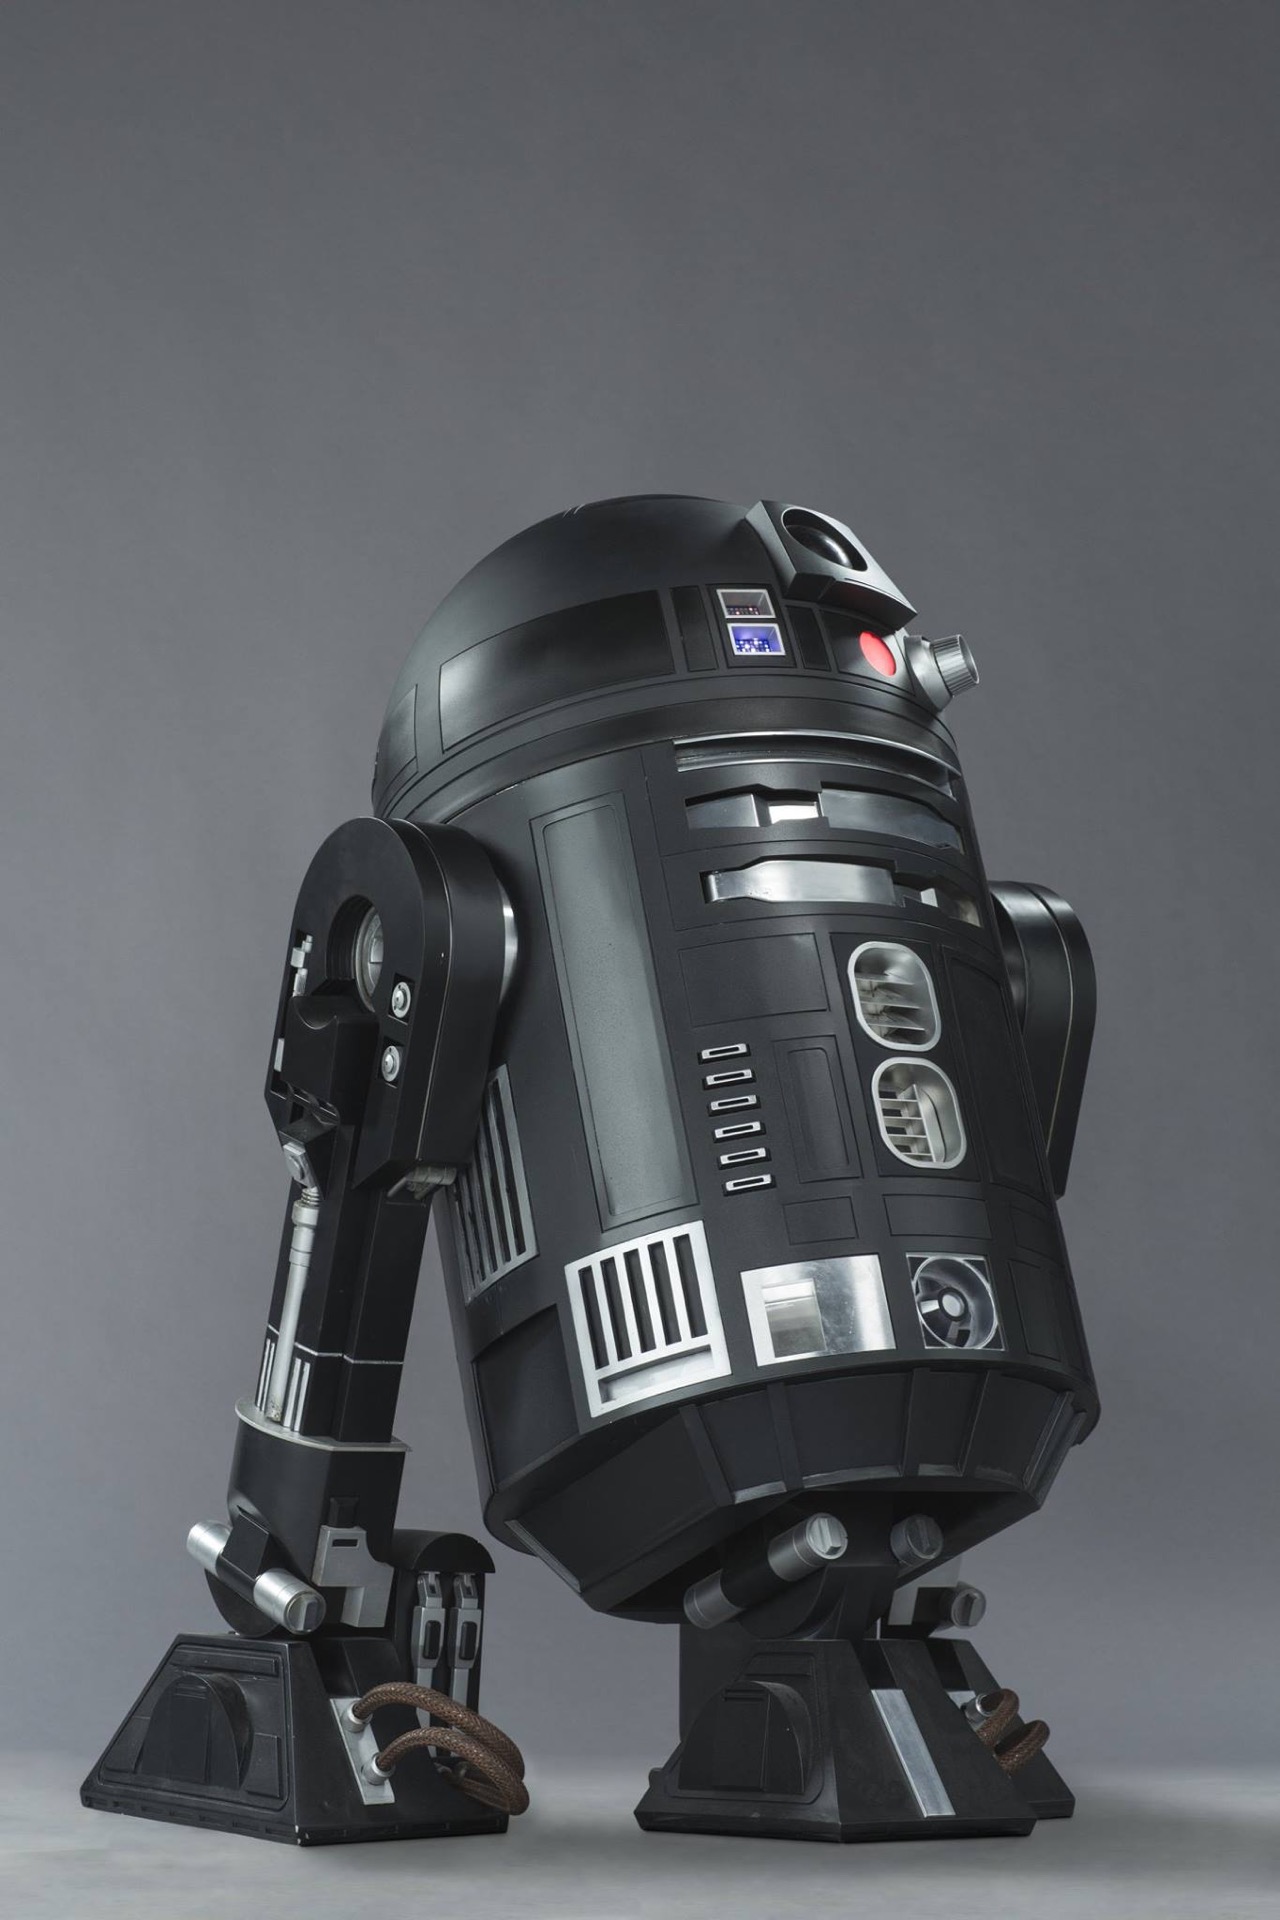 new-black-r2-d2-style-droid-revealed-for-star-wars-rogue-one-film-junkee